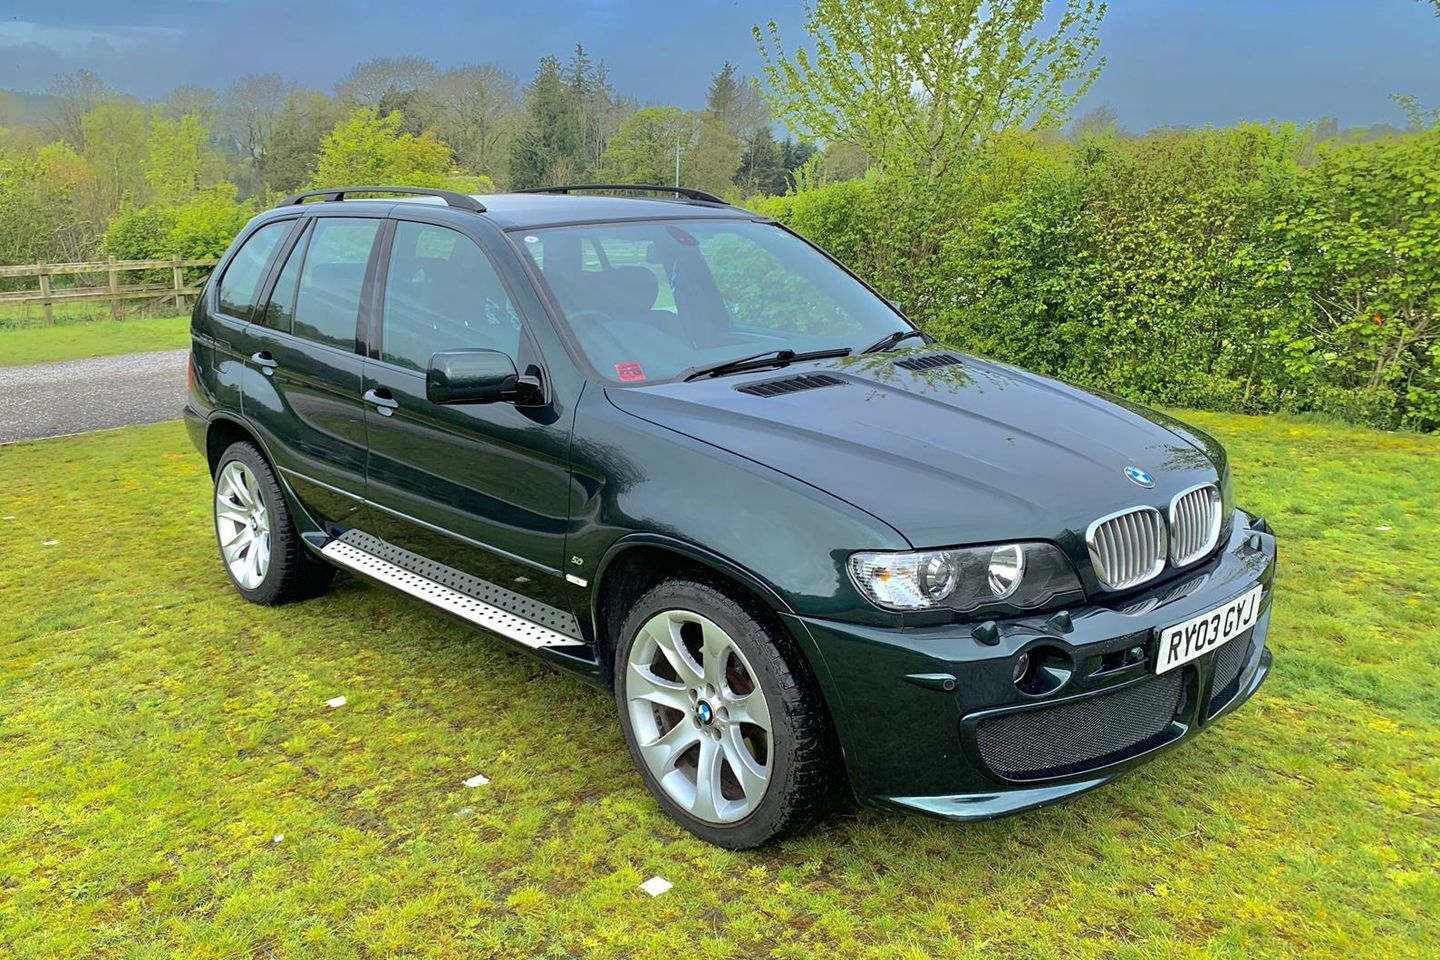 BMW X5 E53 1st Generation - What To Check Before You Buy